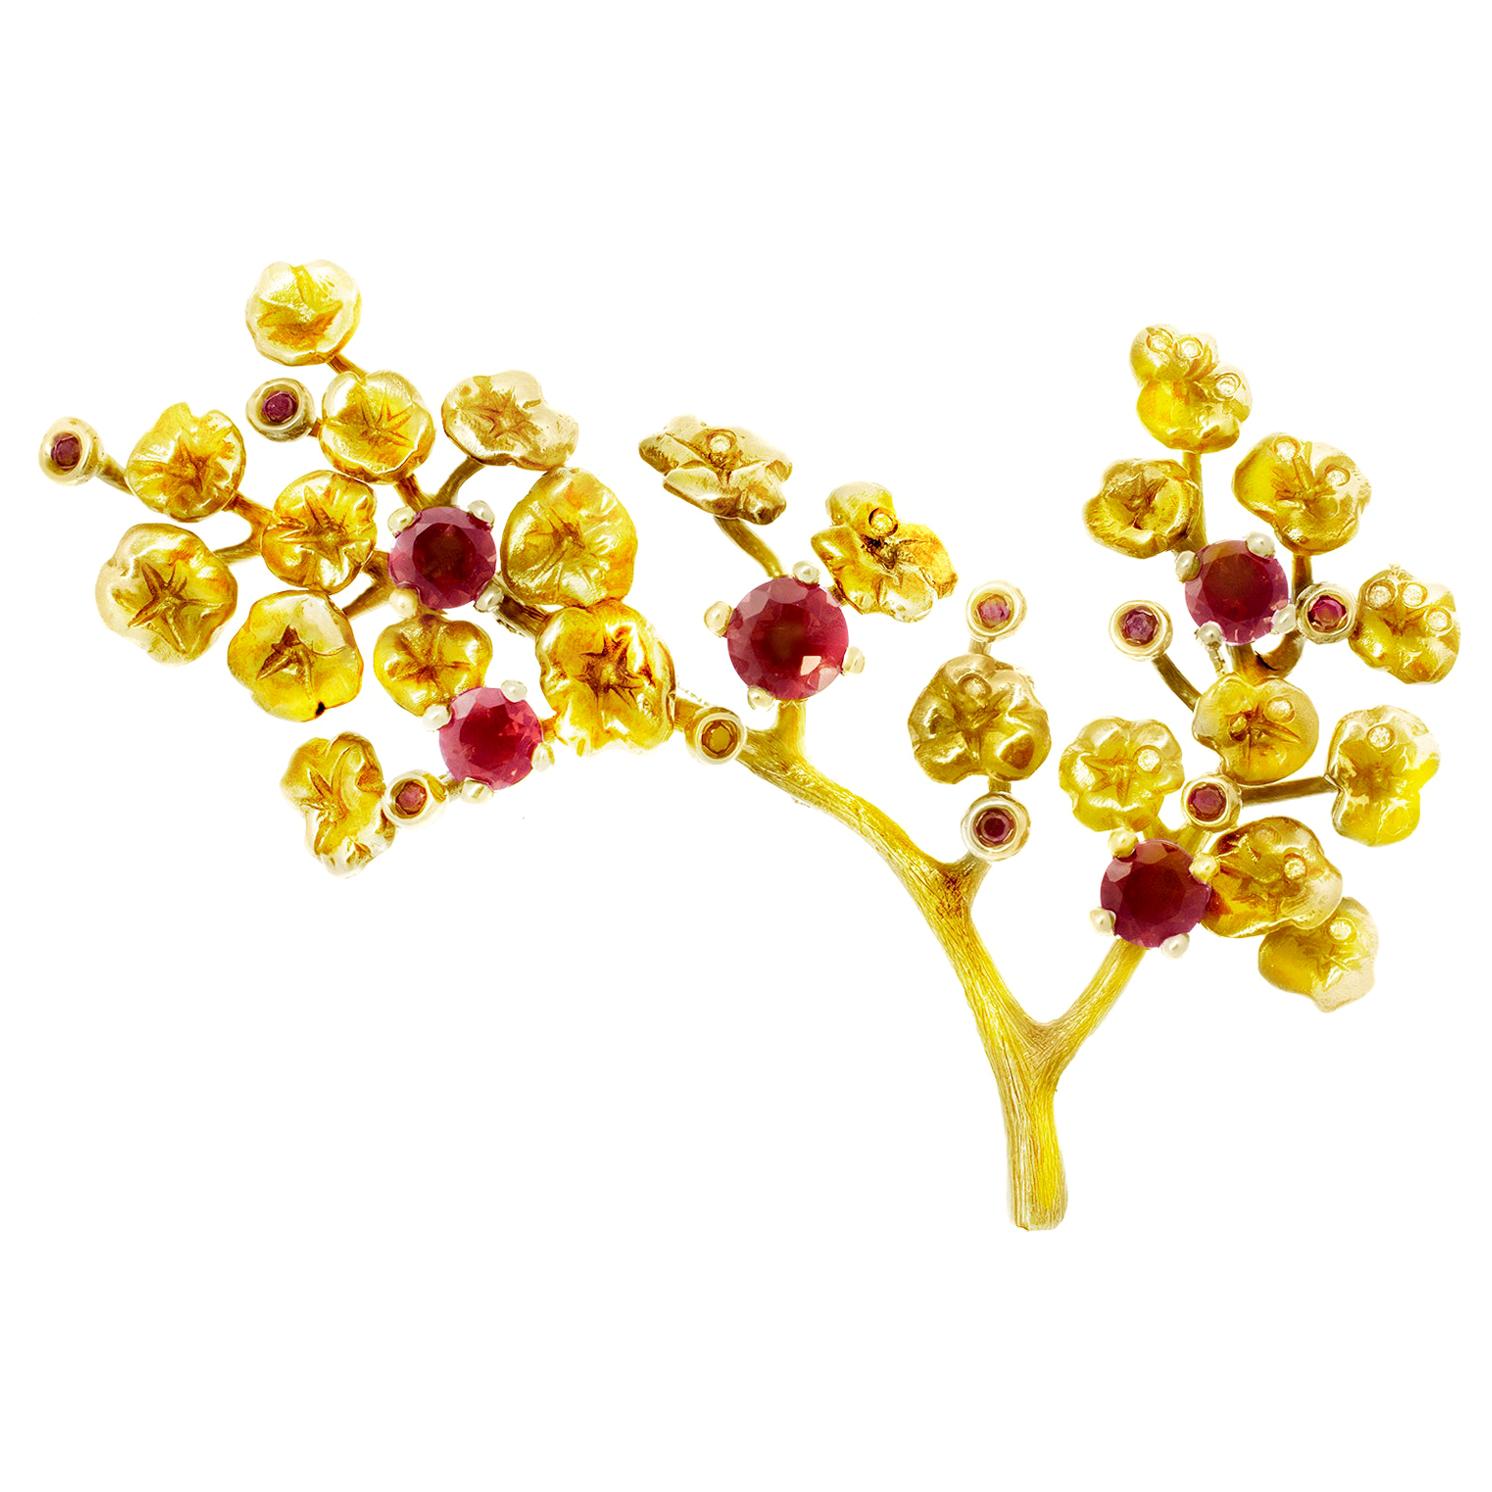 Eighteen Karat Yellow Gold Brooch with Rubies and Diamonds by Polya Medvedeva For Sale